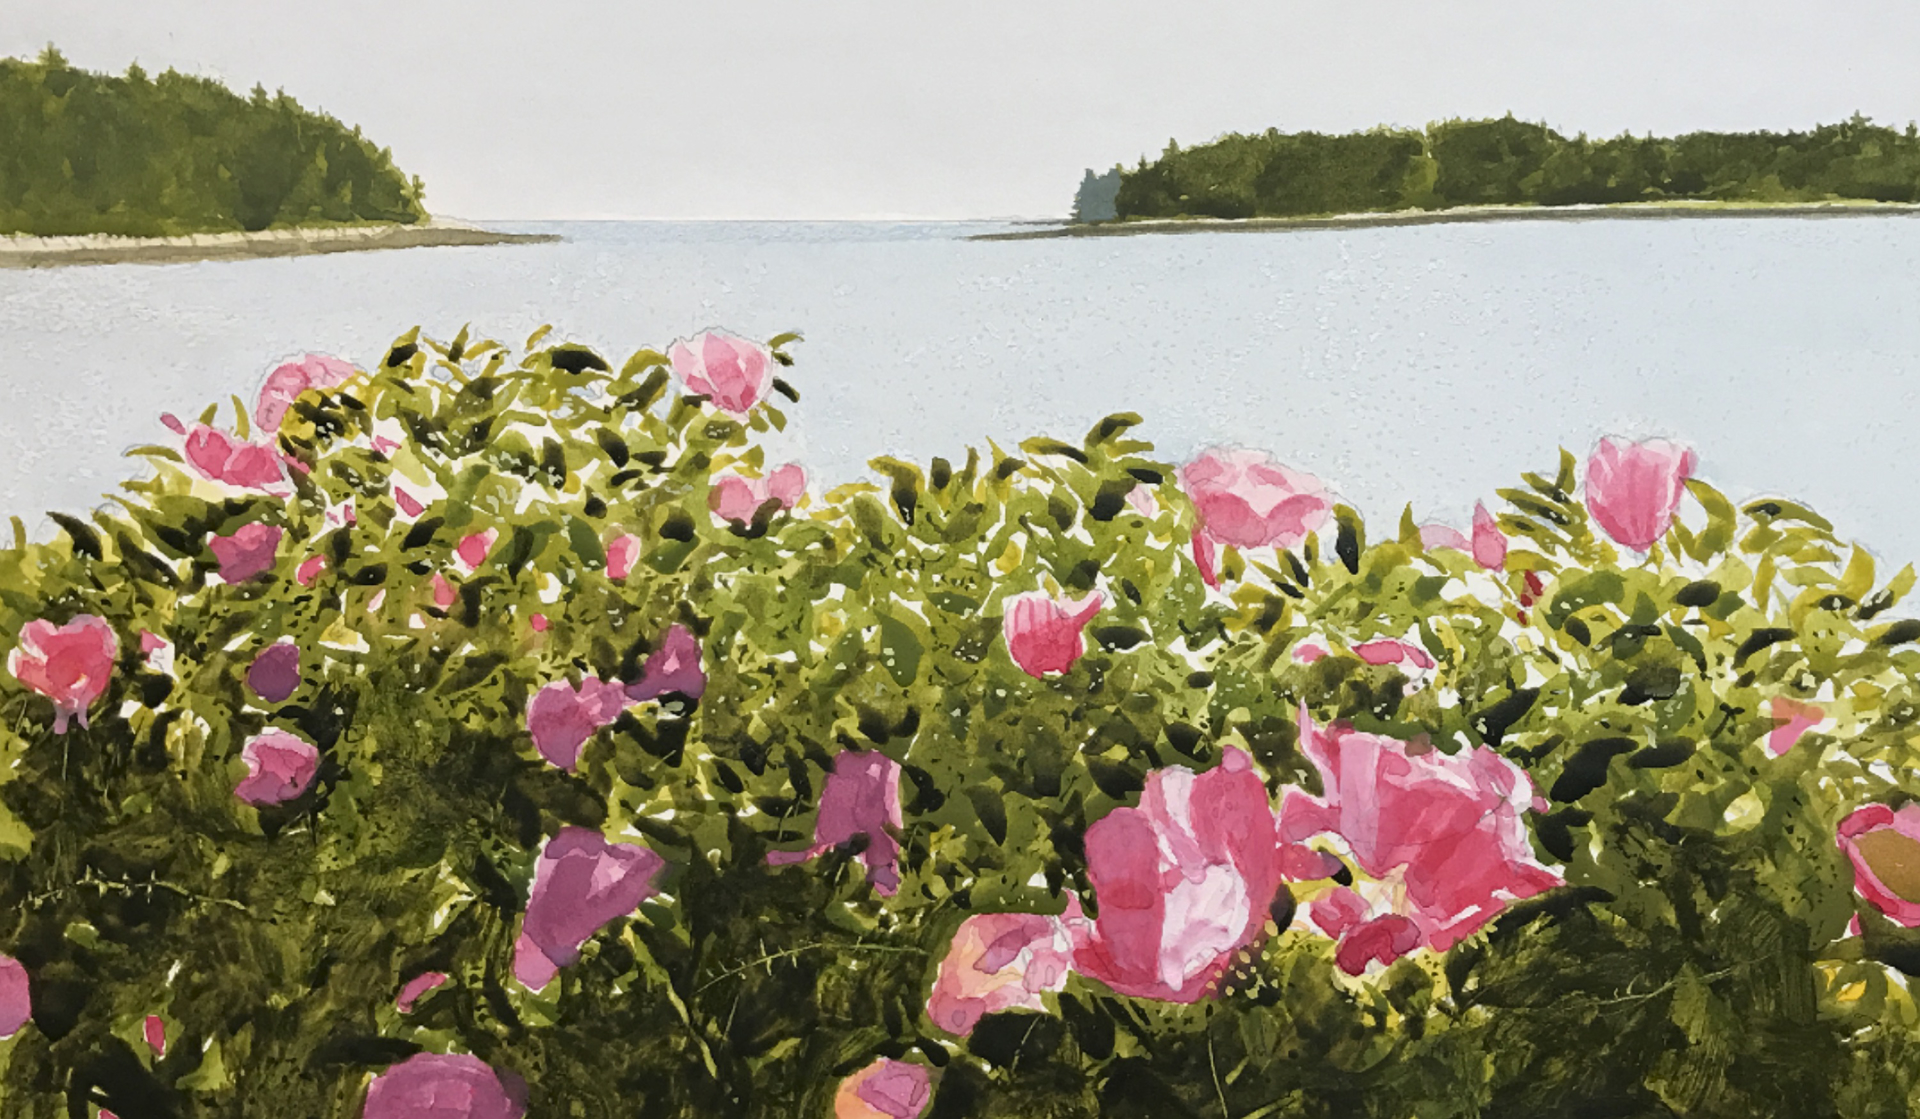 Island Roses by Gary Akers